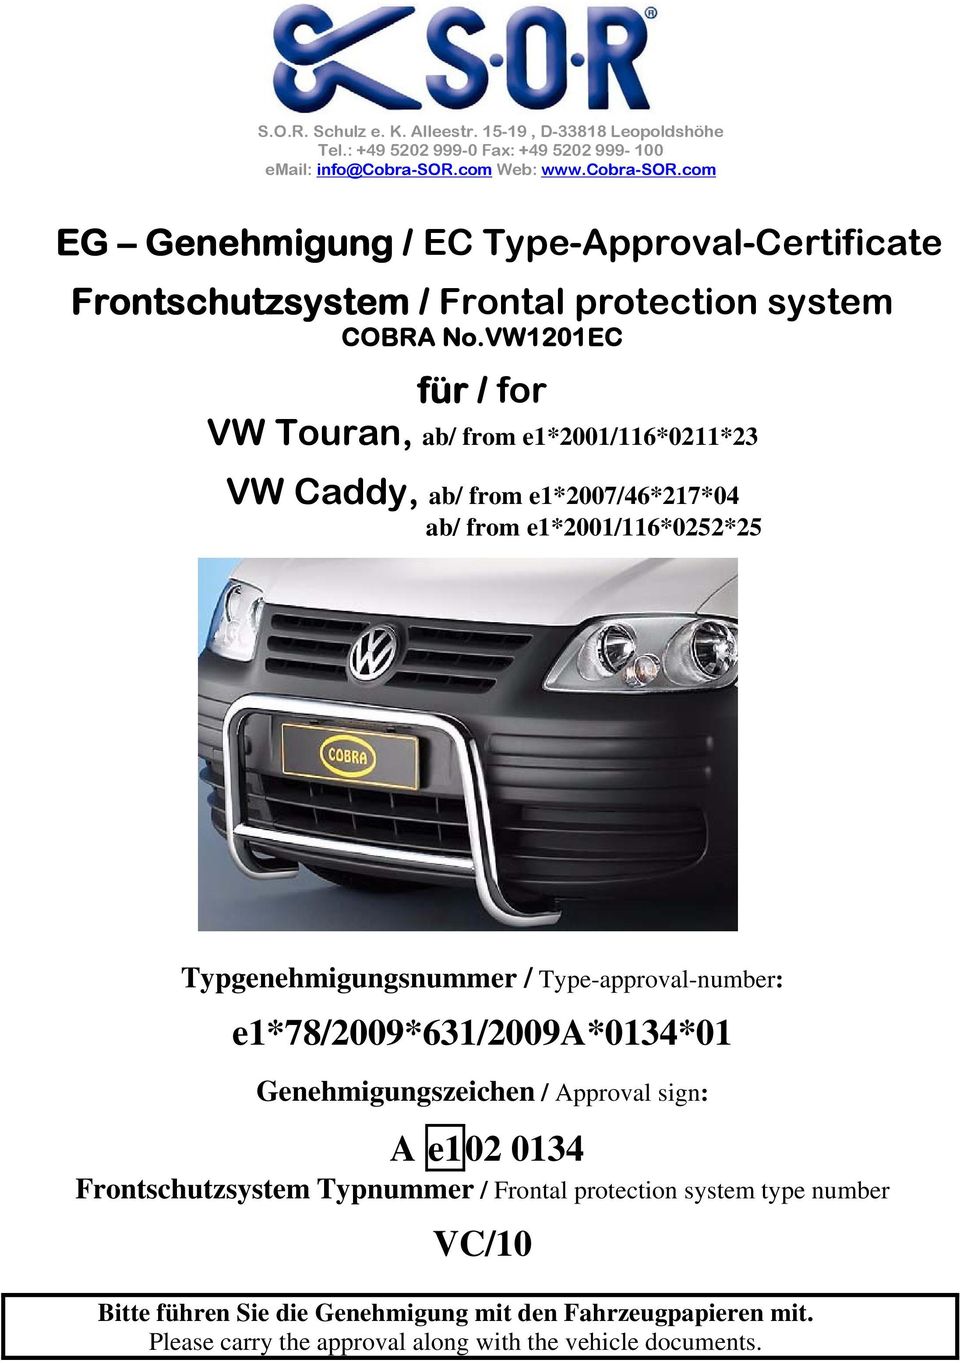 VW1201EC für / for VW Touran, ab/ from e1*2001/116*0211*23 VW Caddy, ab/ from e1*2007/46*217*04 ab/ from e1*2001/116*0252*25 Typgenehmigungsnummer / Type-approval-number: